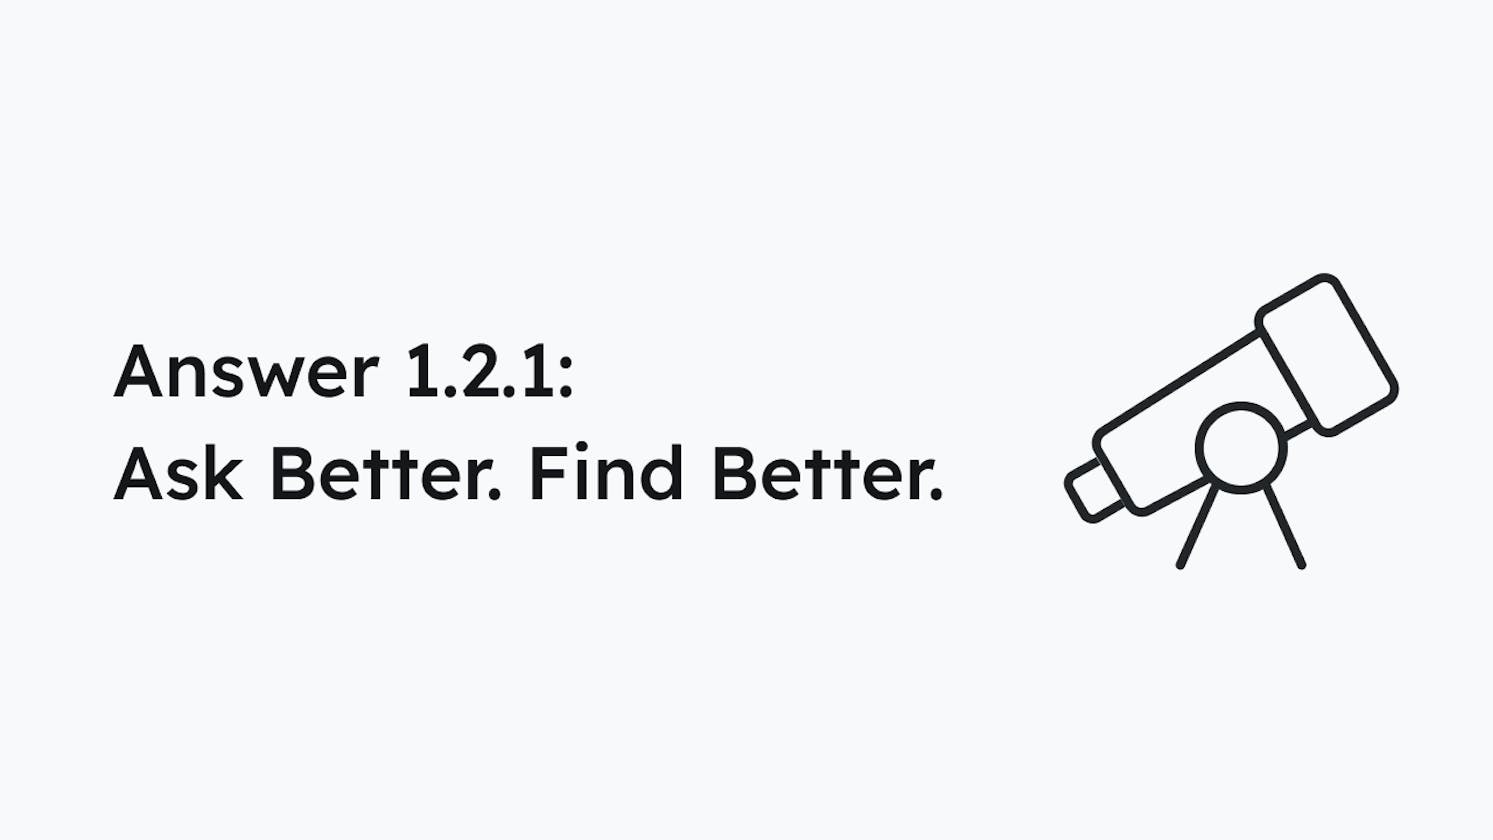 Answer 1.2.1: Ask Better. Find Better.